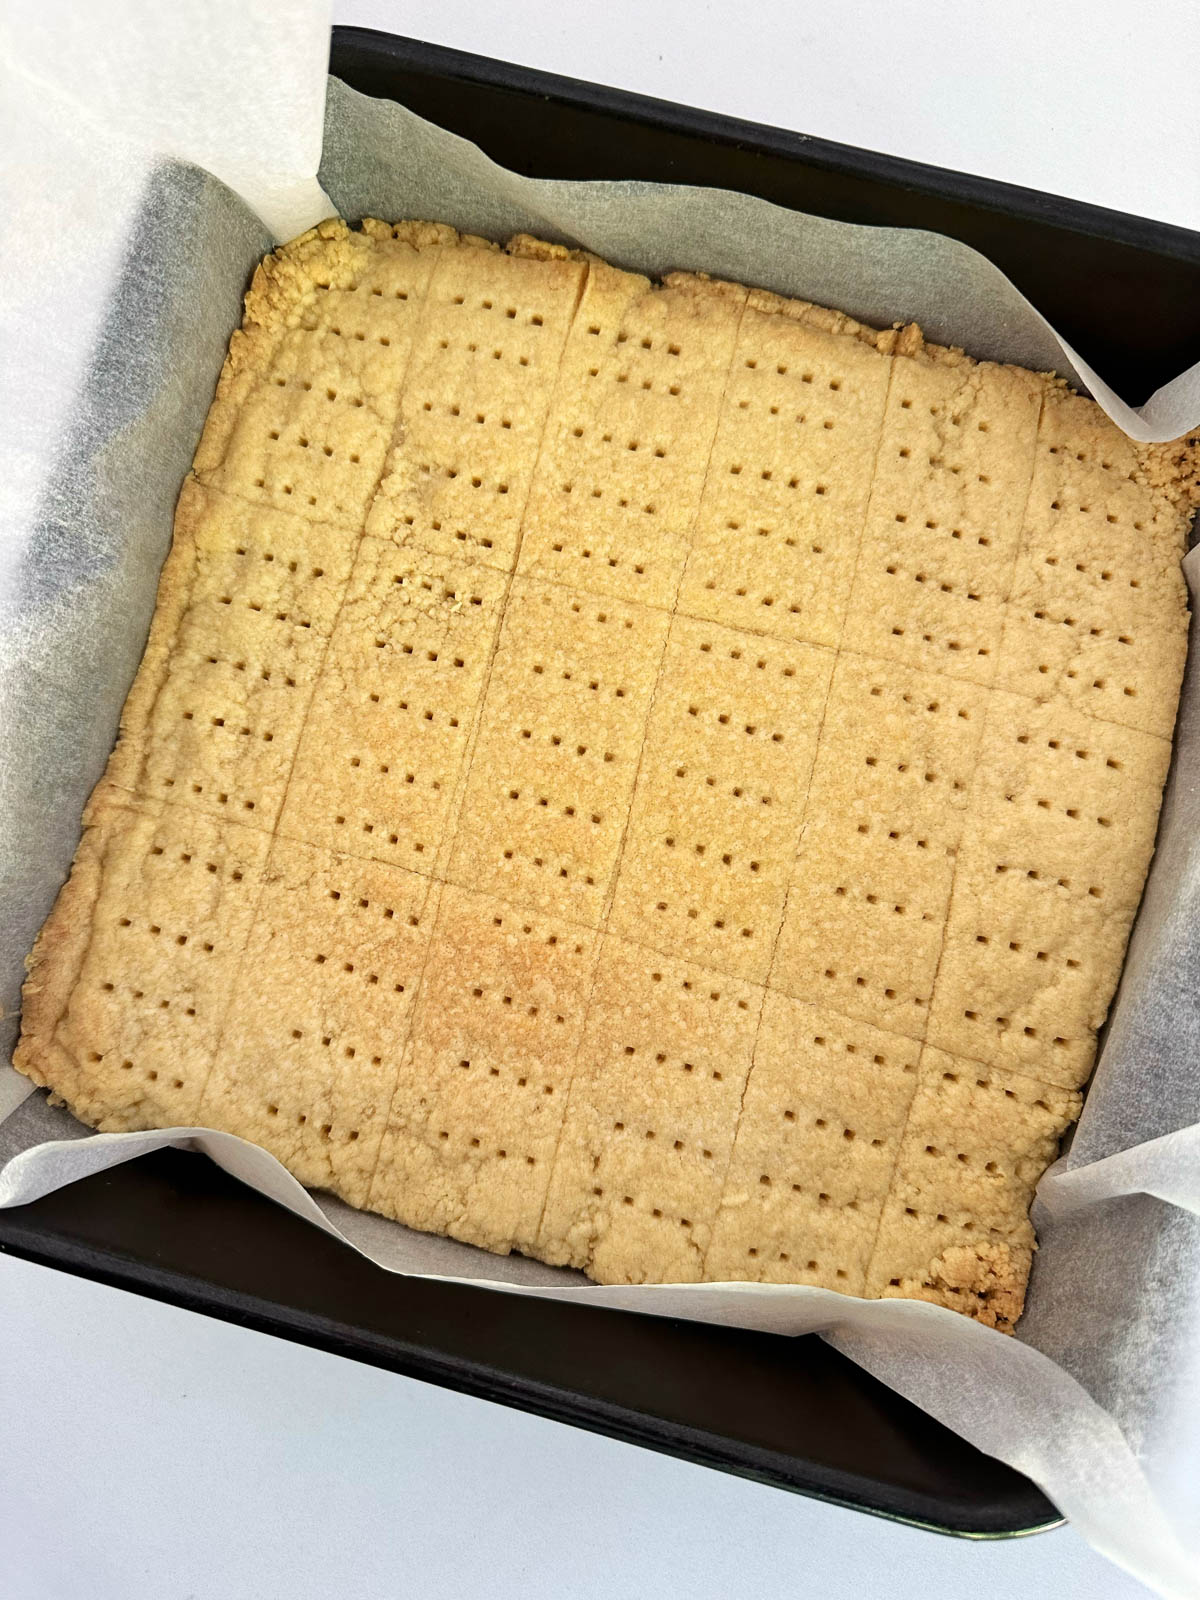 Thermomix shortbread baked fresh from oven.